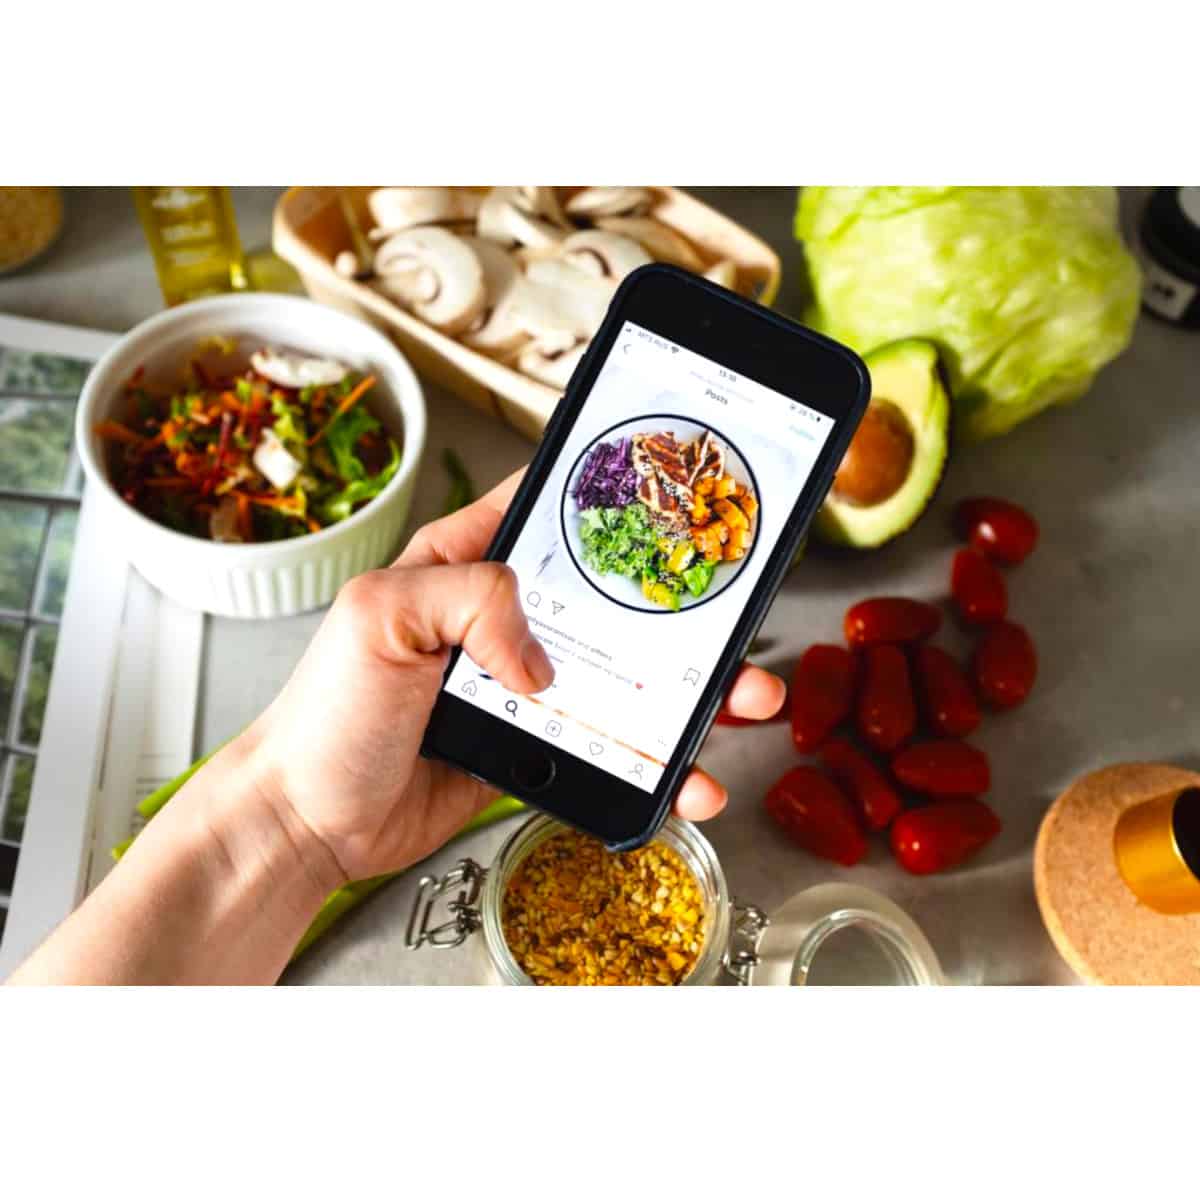 a picture of a meal and a person holding a cell phone researching the meal in a healthy online app